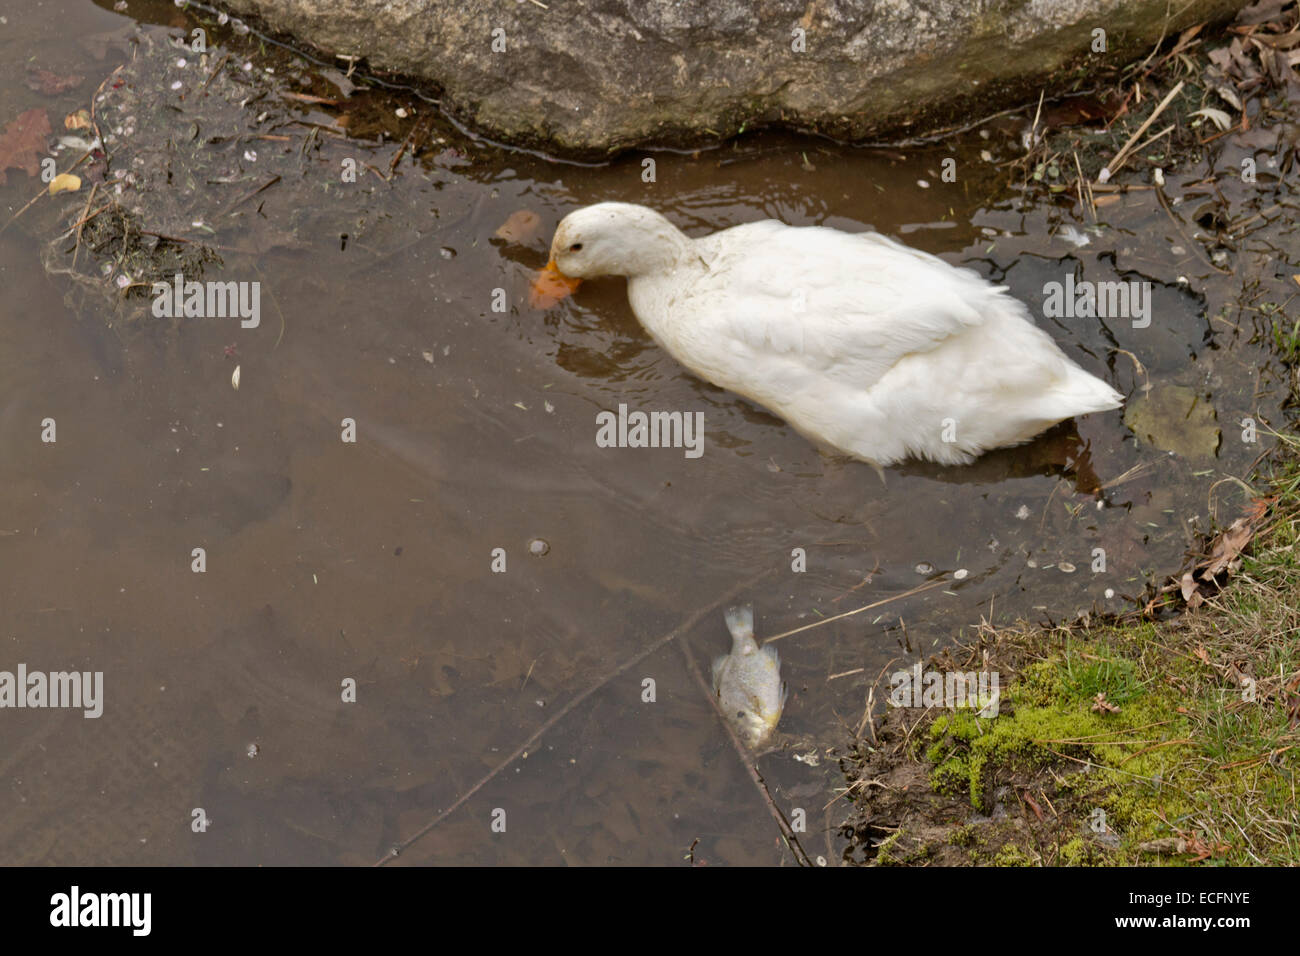 A white duck forages in polluted water next to a dead and floating fish Stock Photo